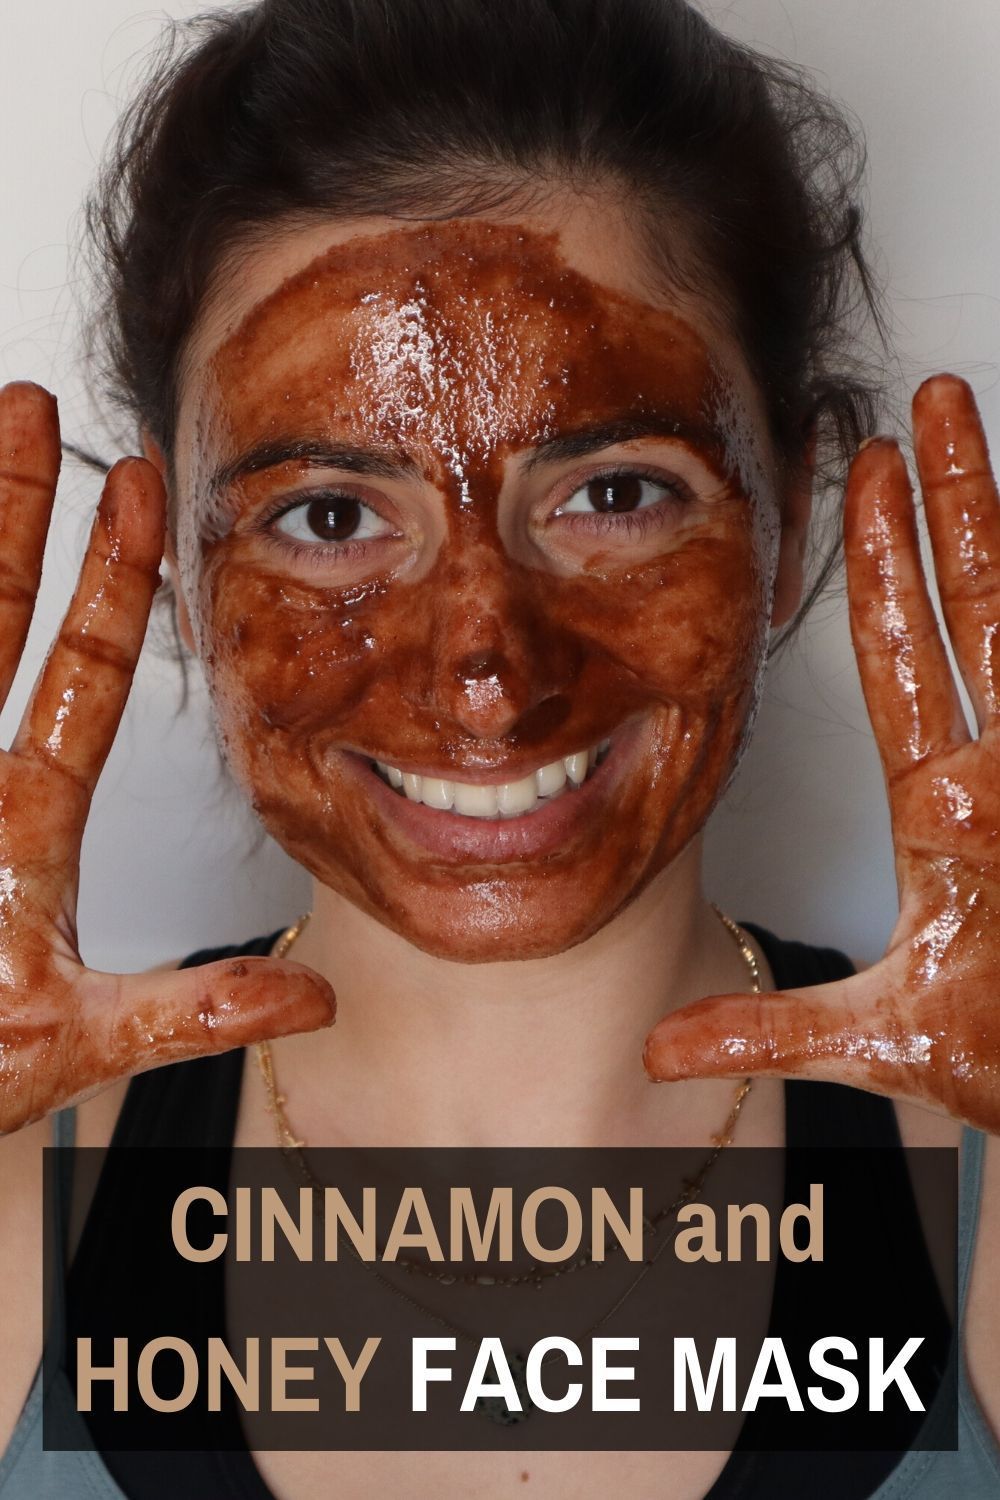 CINNAMON and HONEY FACE MASK for ACNE FREE & GLOWING SKIN - CINNAMON and HONEY FACE MASK for ACNE FREE & GLOWING SKIN -   19 diy Face Mask cinnamon ideas